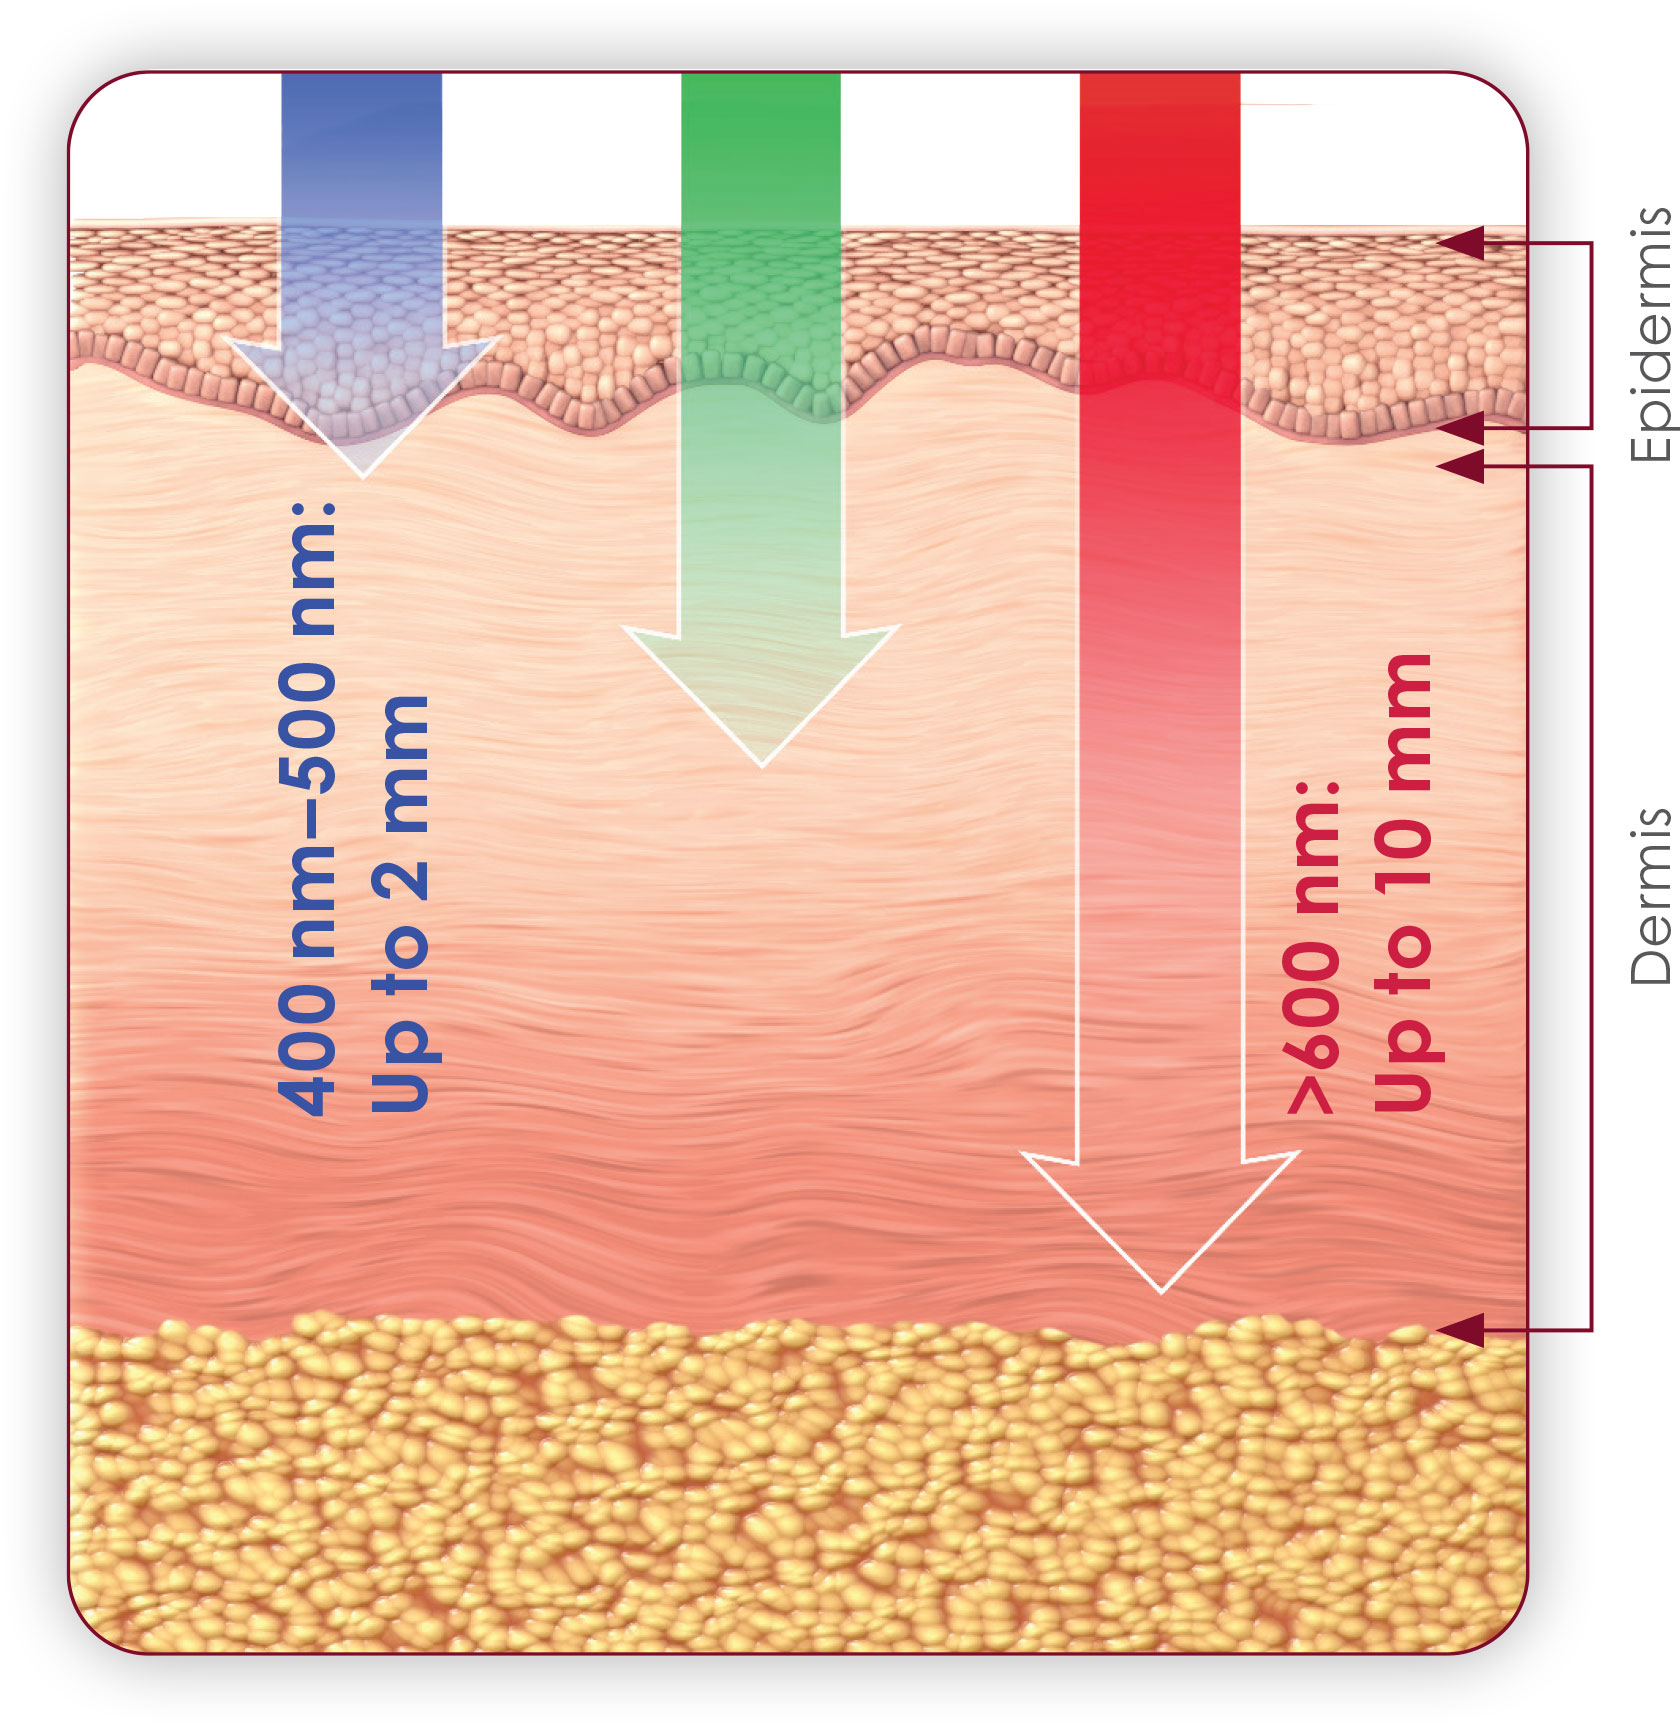 2-D Schematic showing the 3 layers of the skin, the epidermis, the dermis and the hypodermis with arrow figures depicting how 3 different wavelengths of light penetrate differently into the layers of the skin. Red light with a wavelength of 600 nanometers or greater penetrates up to 10 millimeters deep into the dermis, green light penetrates past the epidermis and into the dermis, blue light with a wavelength of 400-500 nanometers penetrates up to 2 millimeters, just past the epidermis.